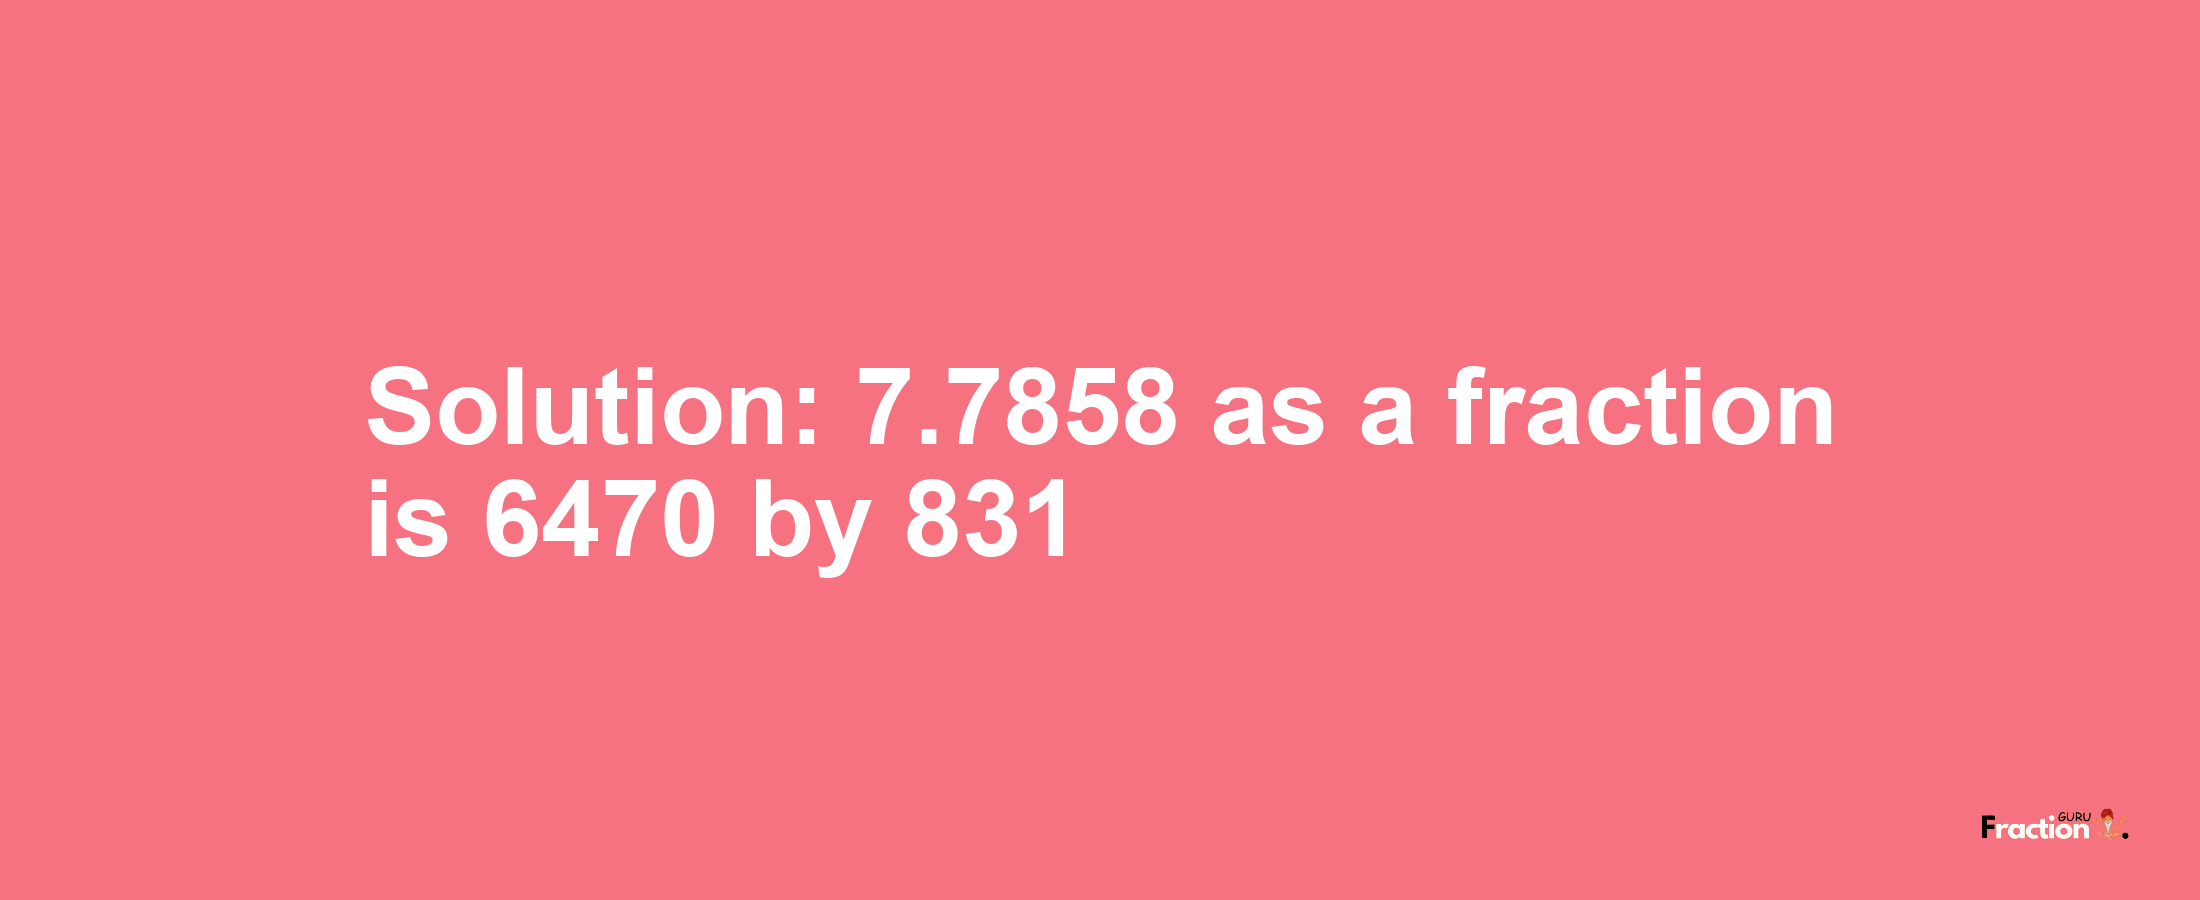 Solution:7.7858 as a fraction is 6470/831